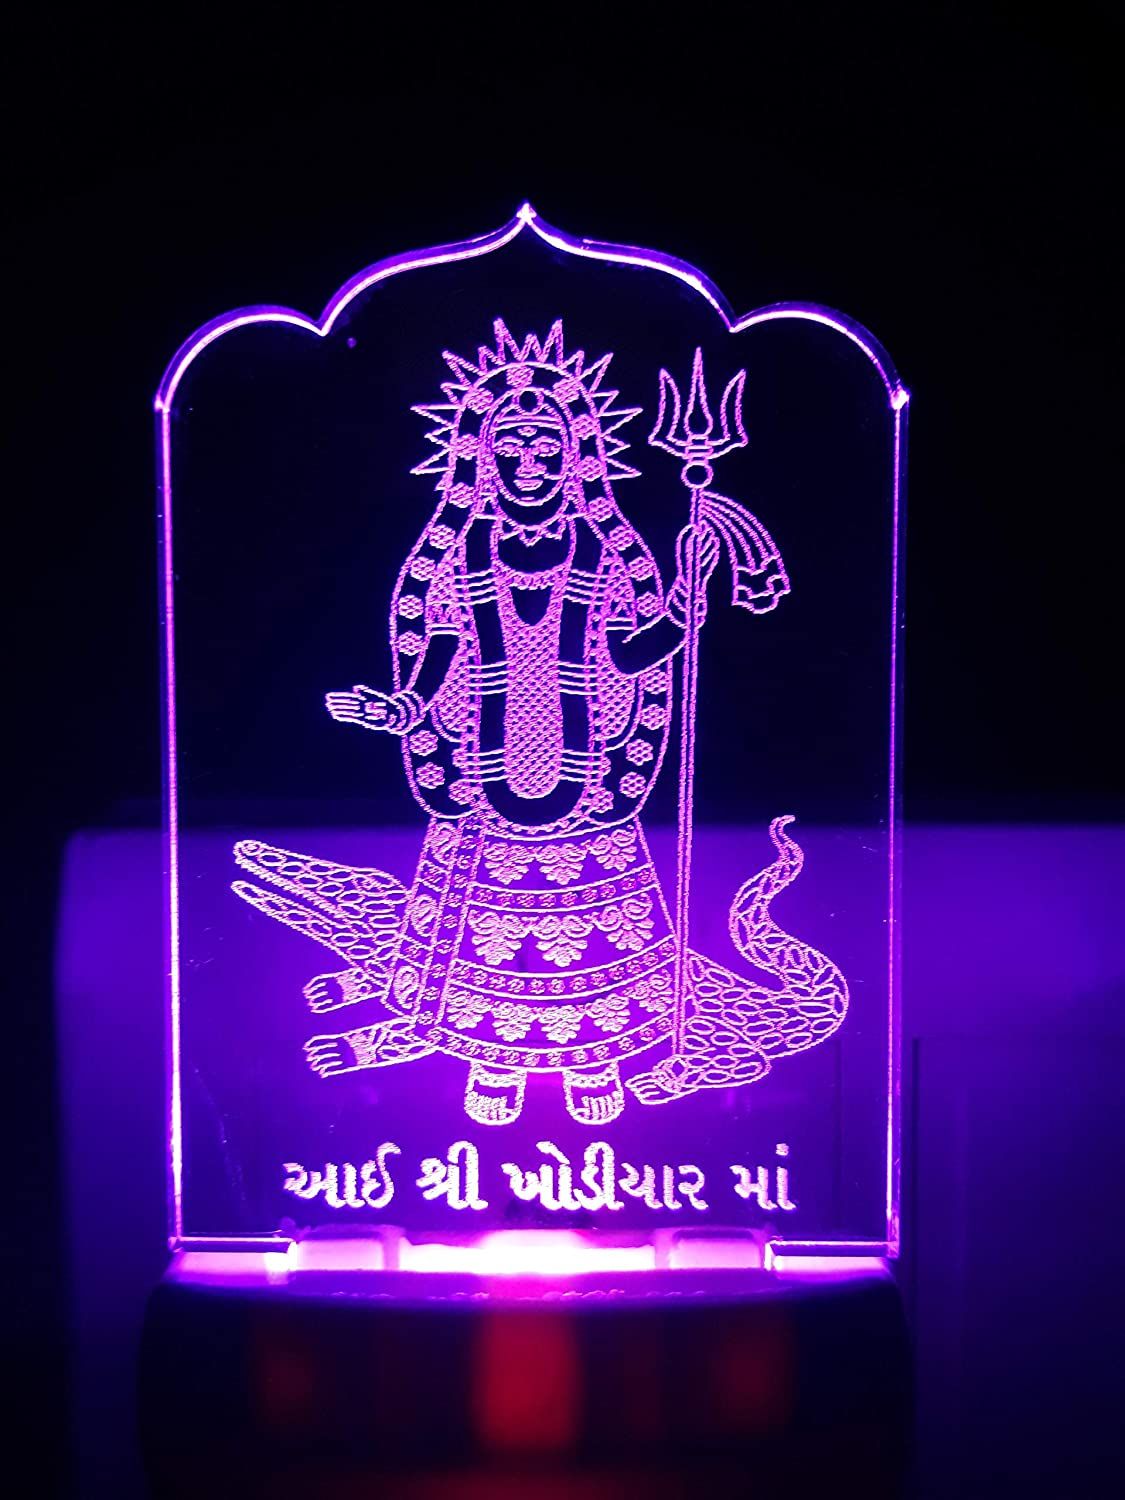 Buy Amrut Art Shree Khodiyar Maa 3D LED Night Lamp with Plug (Multicolour) Online at Low Prices in India